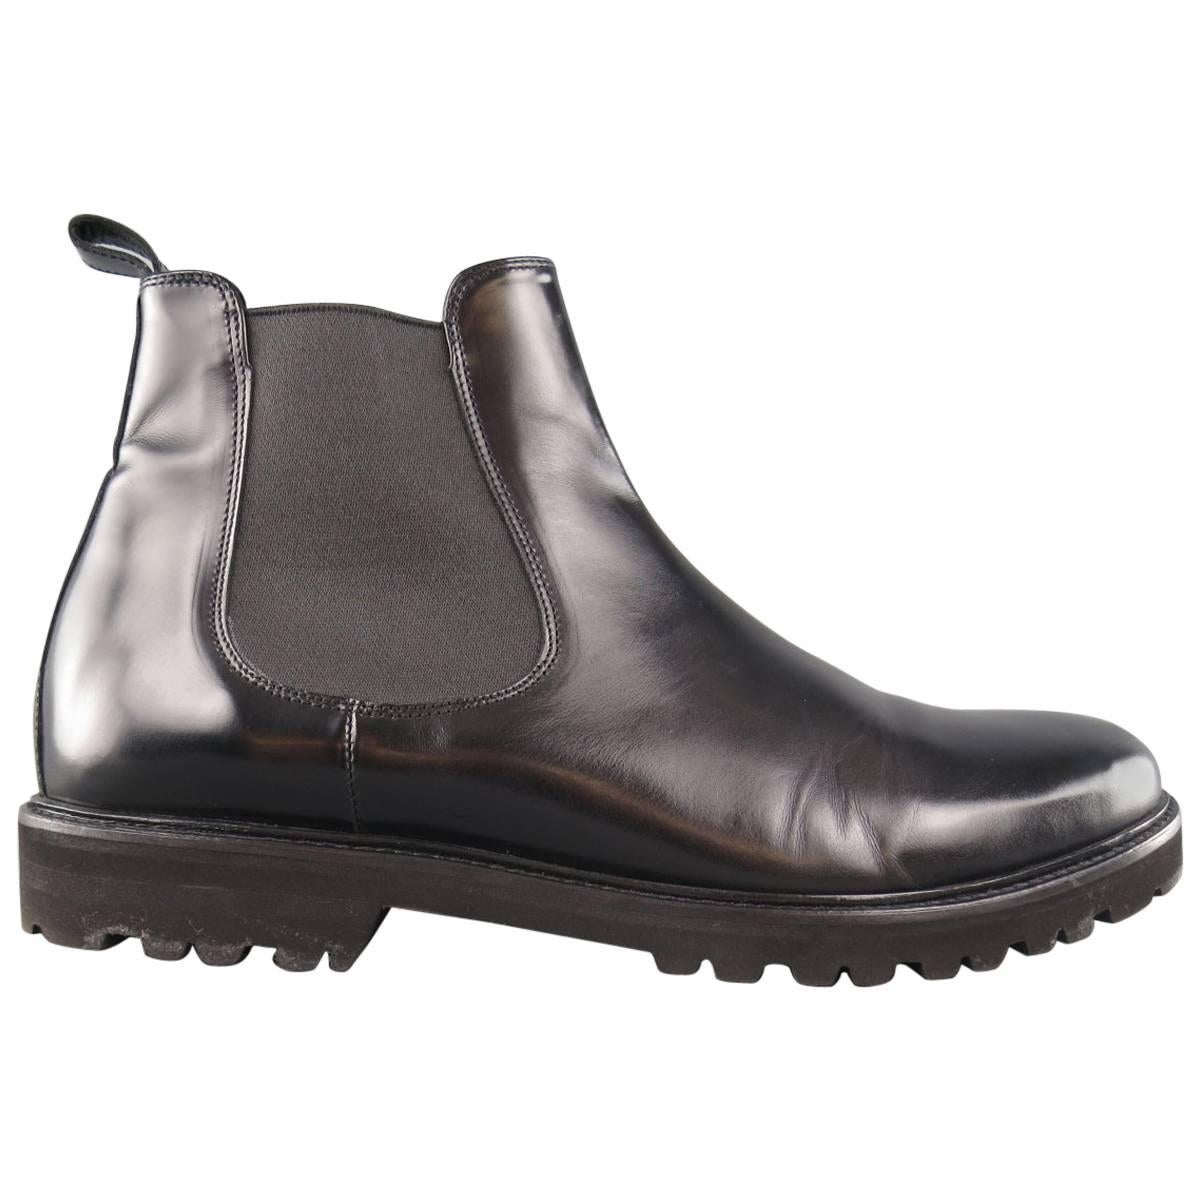 Men's THEORY Ankle Boots - US 12 Black Solid Leather Shoes